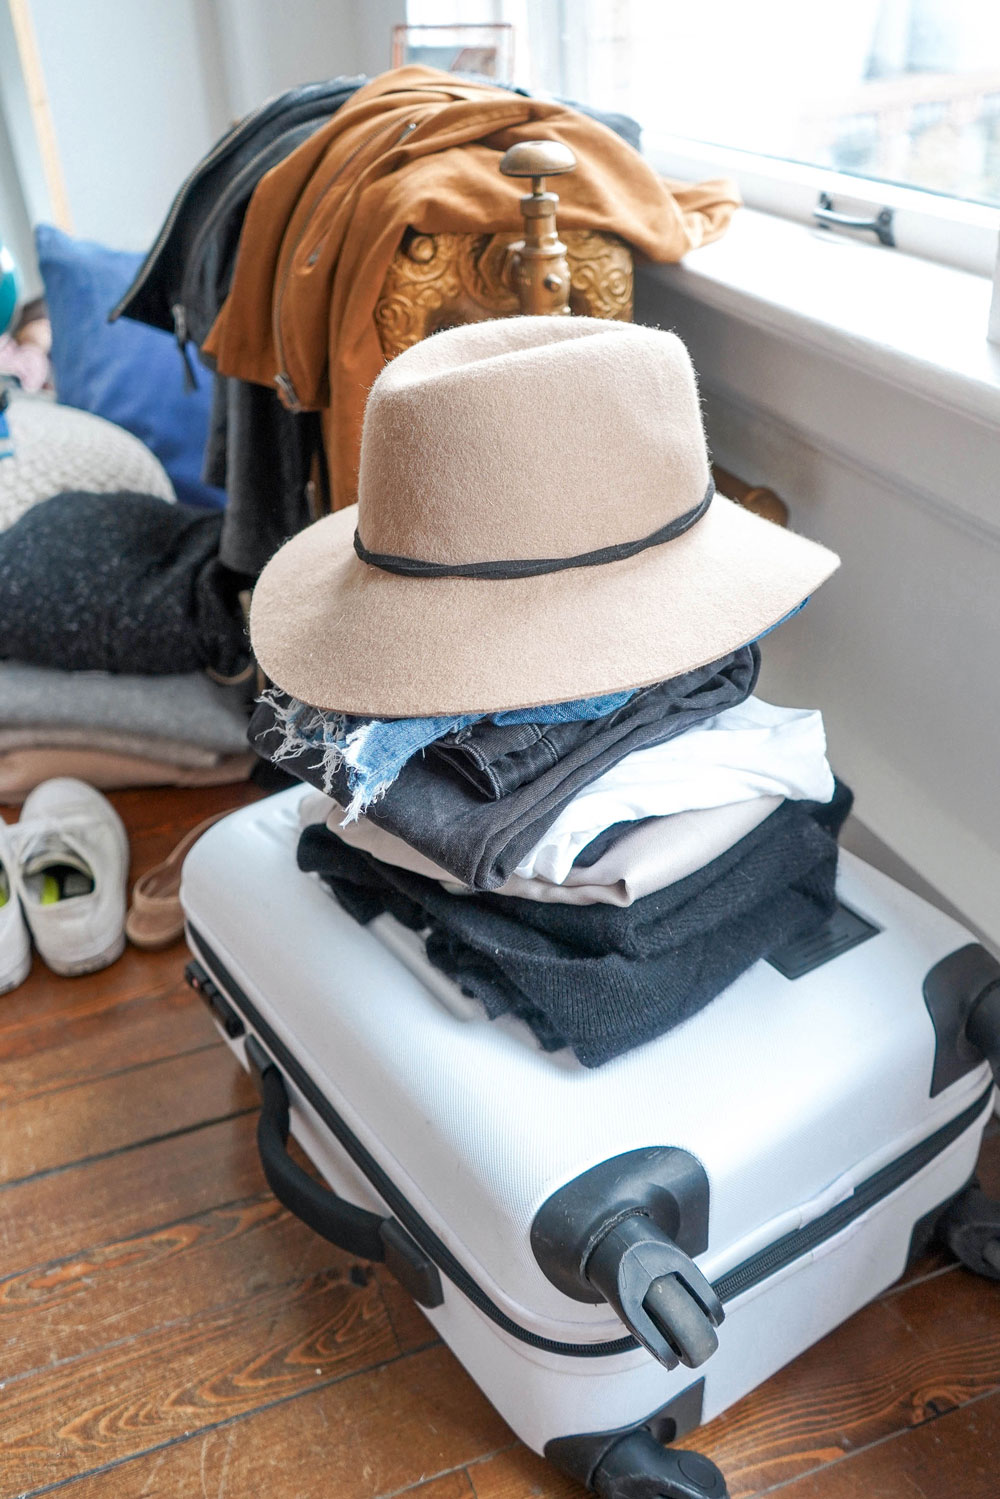 How to pack a carry on bag for 10 days